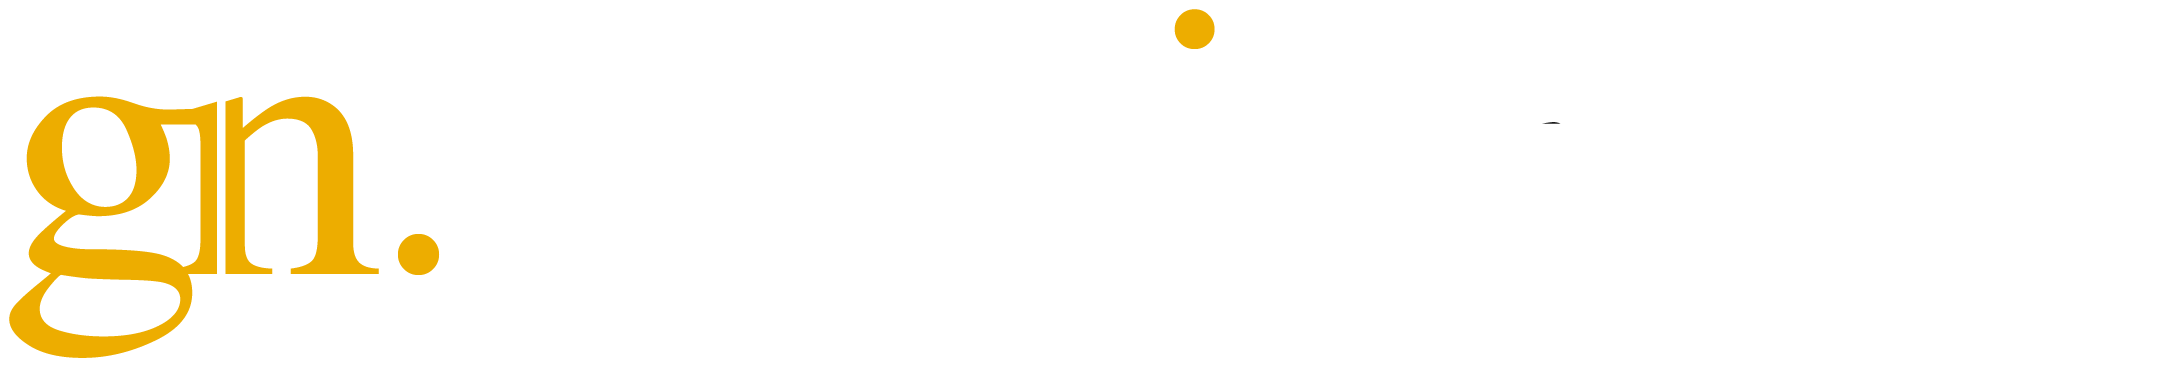 GN Media Group - Digital Marketing Agency For Local Business